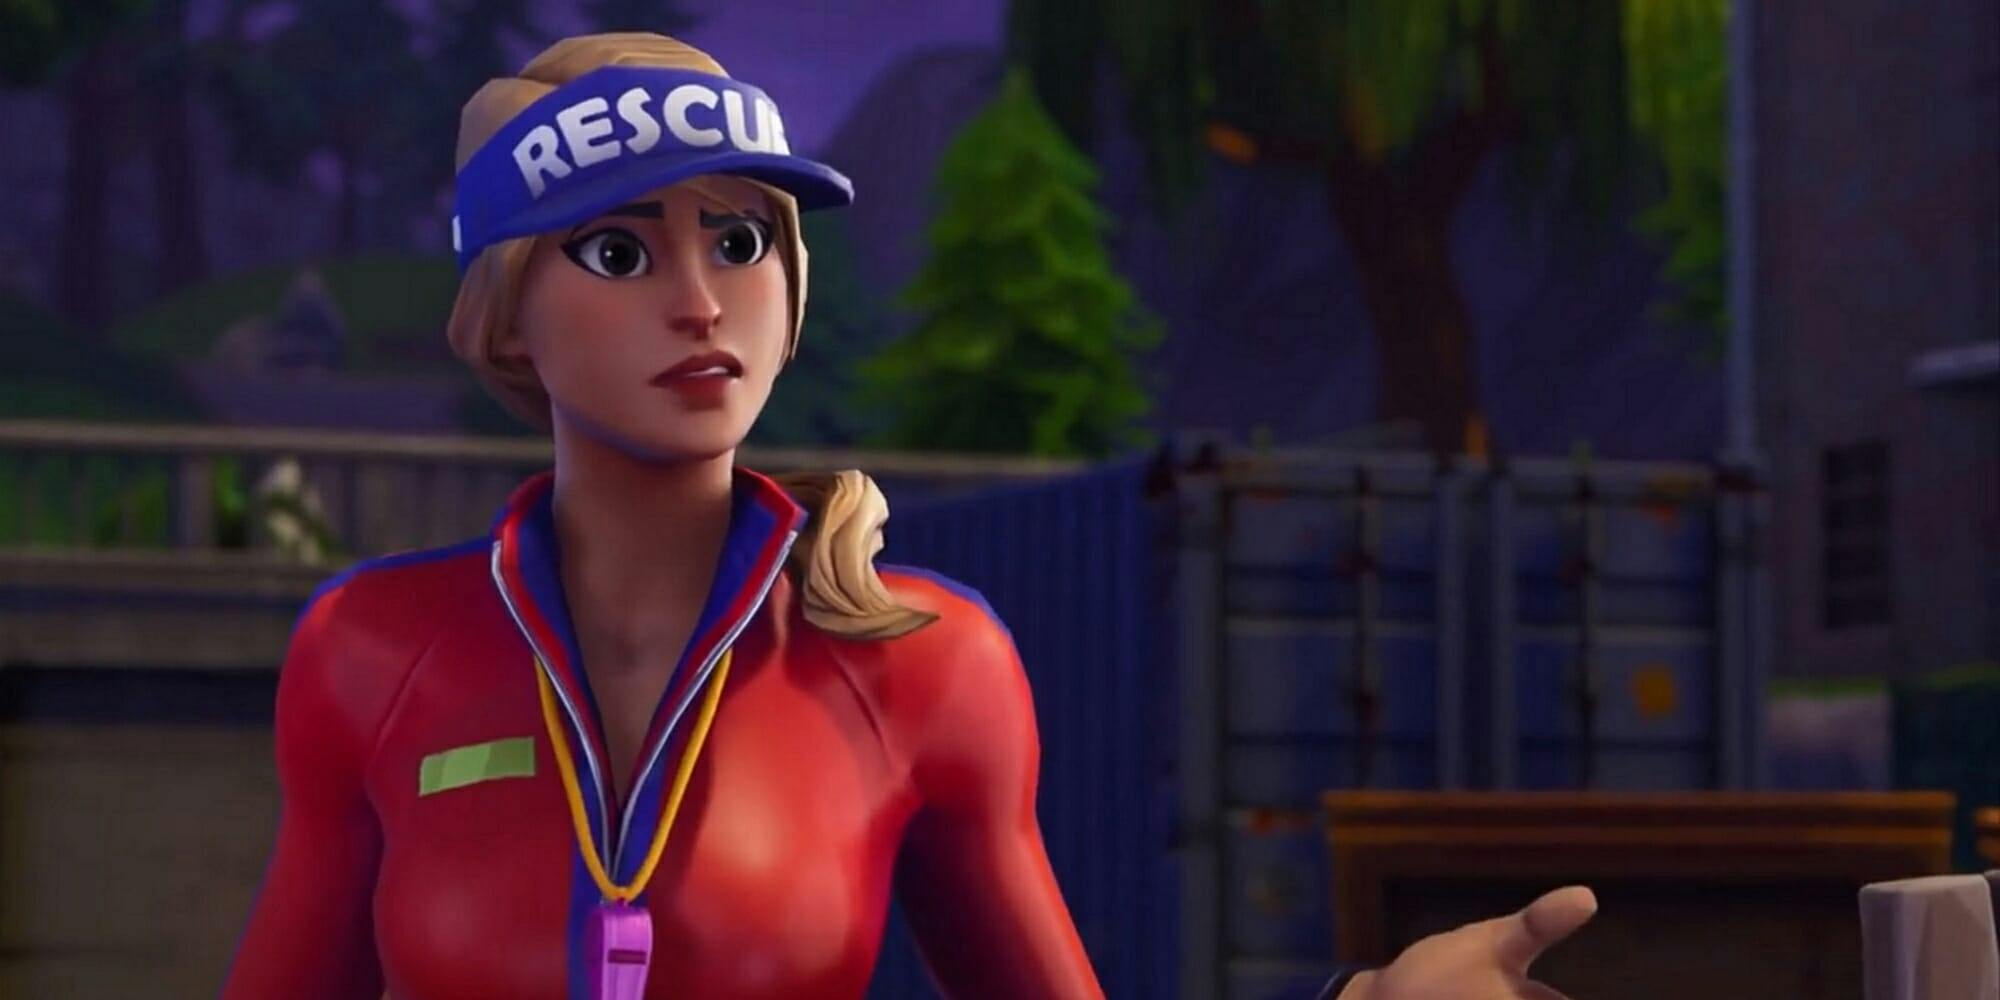 Fortnite porn searches jumped by 112 percent after Season 6 launched